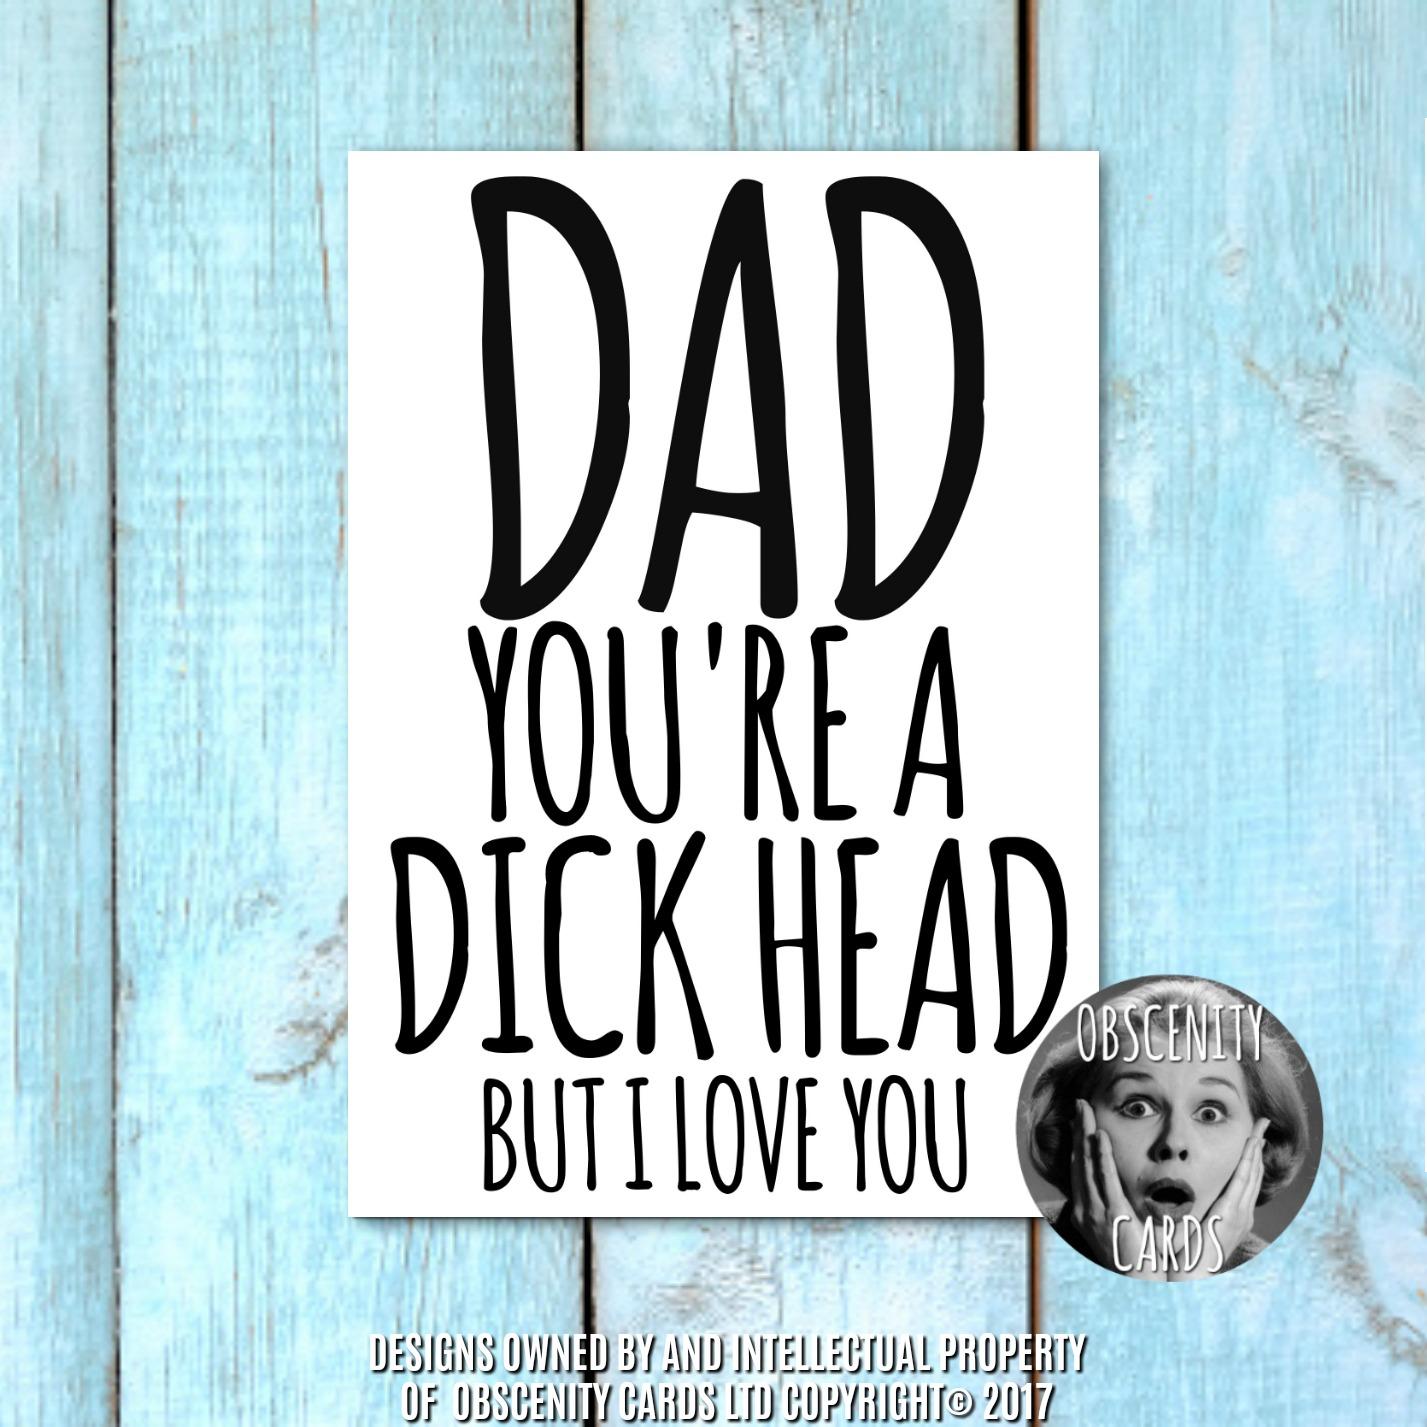 Obscene funny offensive FATHERS DAY  cards by Obscenity cards. Obscene Funny Cards, Pens, Party Hats, Key rings, Magnets, Lighters & Loads More!